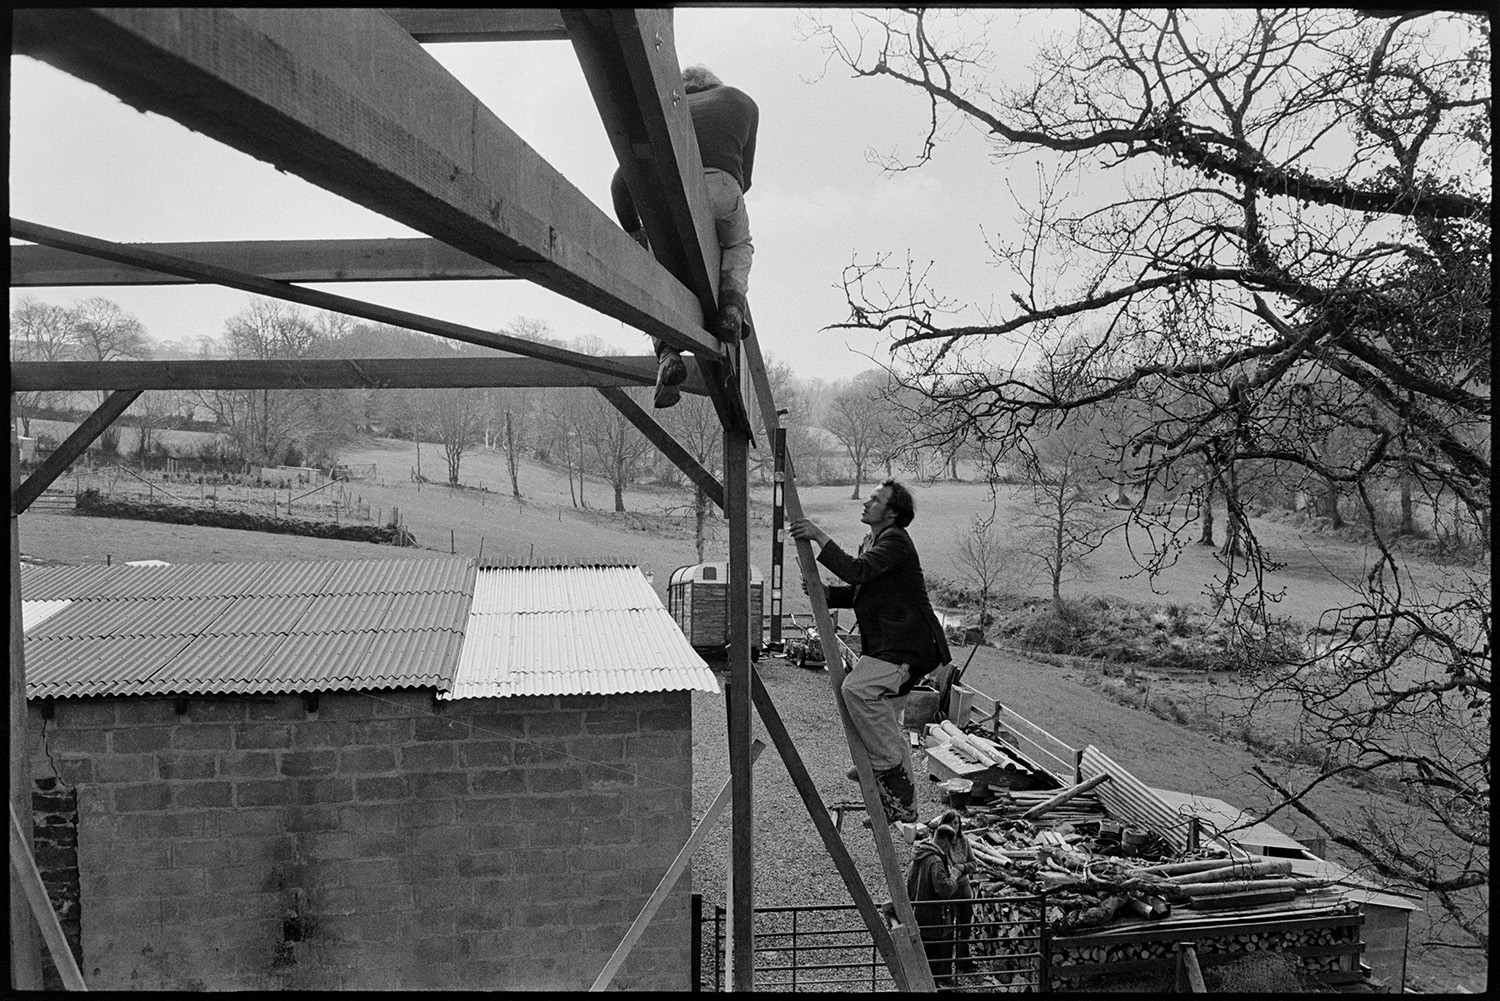 Men building metal and timber framed barn shed. 
[Two men working on a timber and metal frame for a barn near New Bridge, Dolton. One of the men is sat on the frame and the other is climbing a ladder. Construction materials and a barn with a corrugated iron roof are visible in the background.]